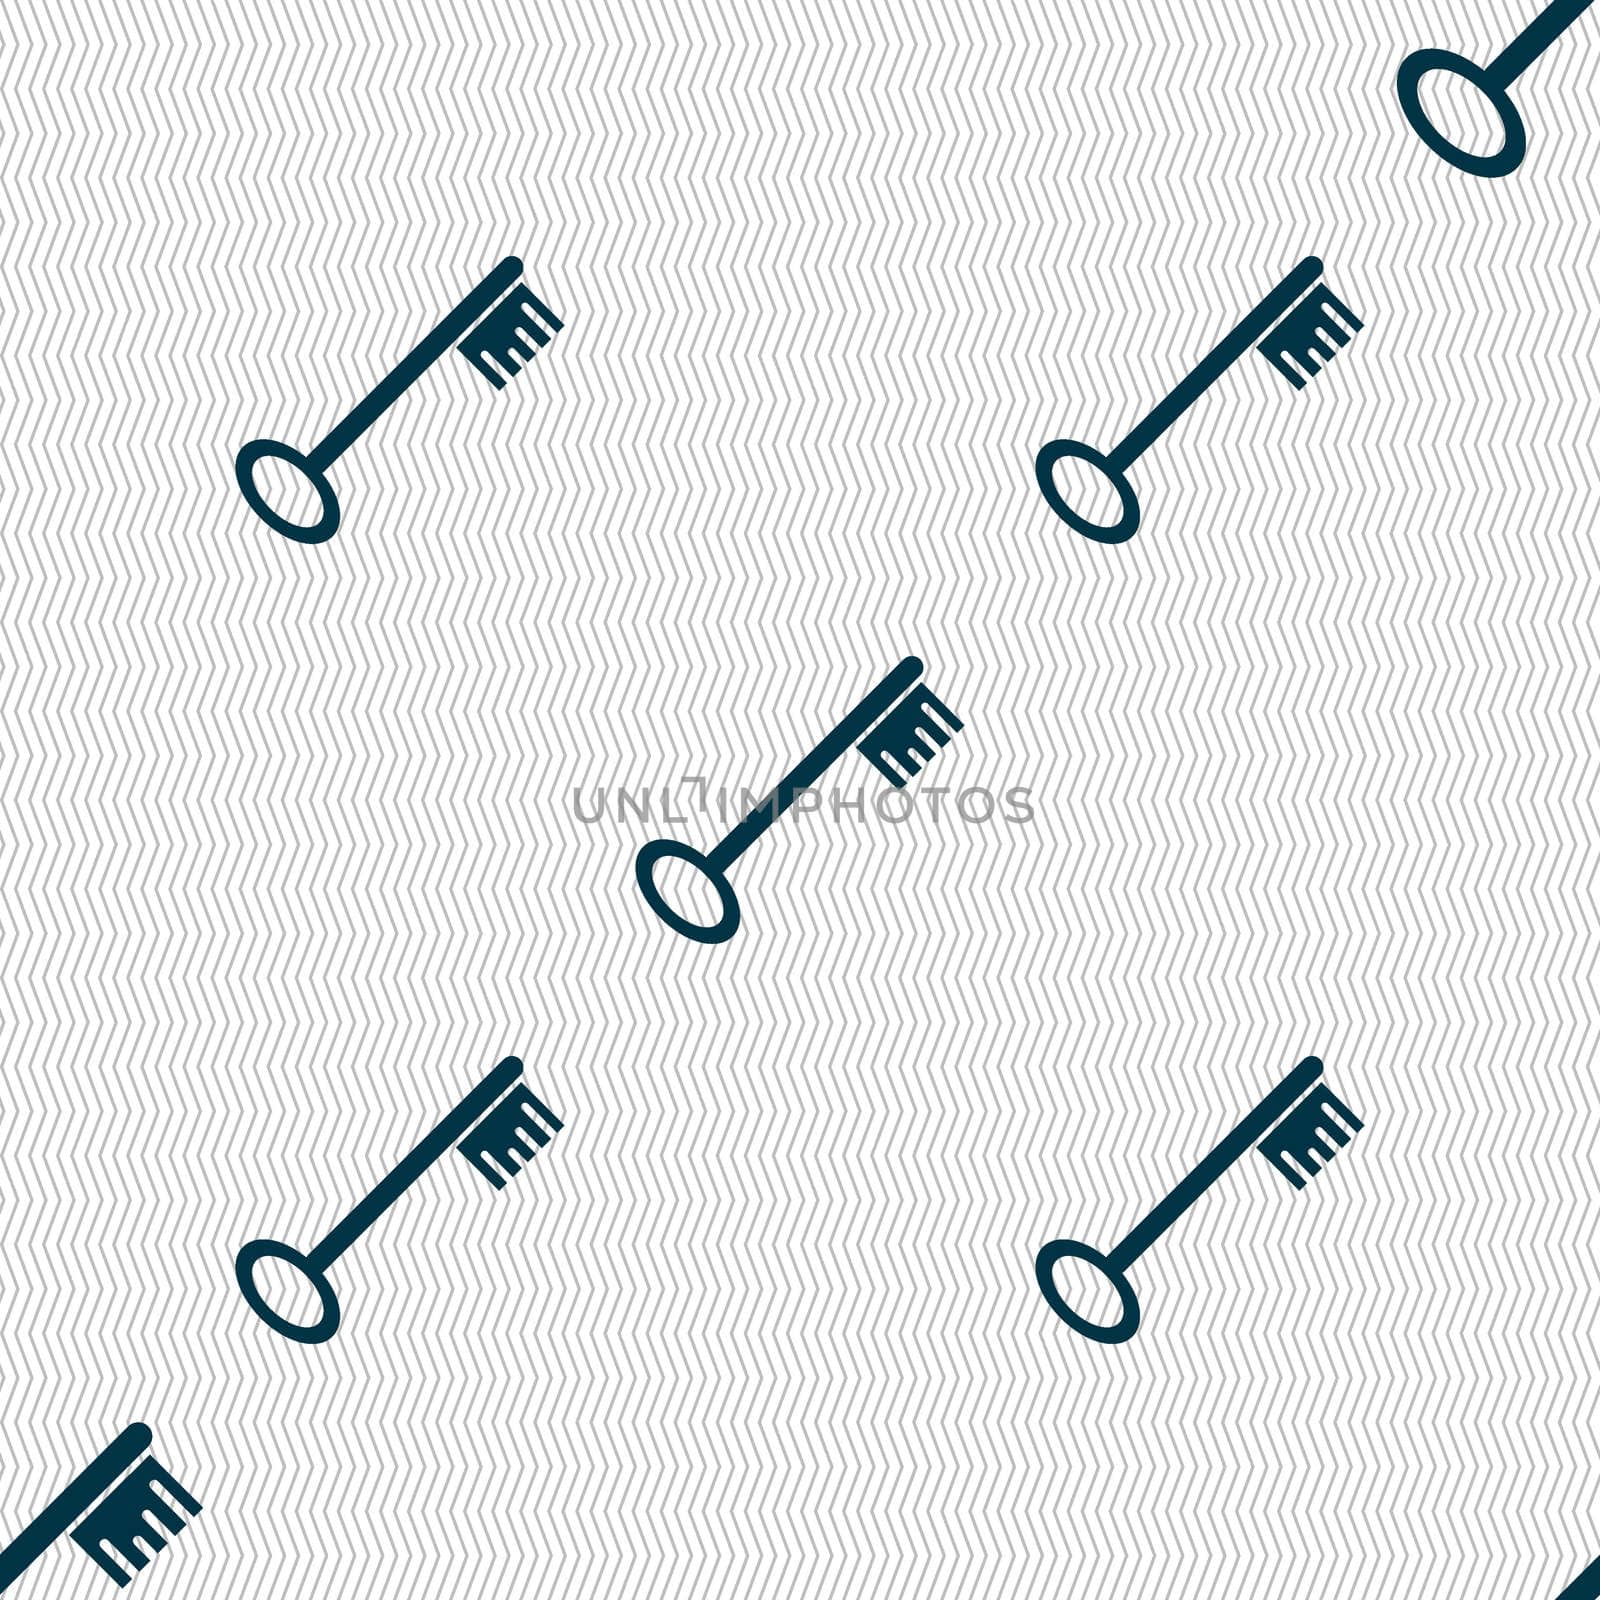 Key icon sign. Seamless abstract background with geometric shapes. illustration